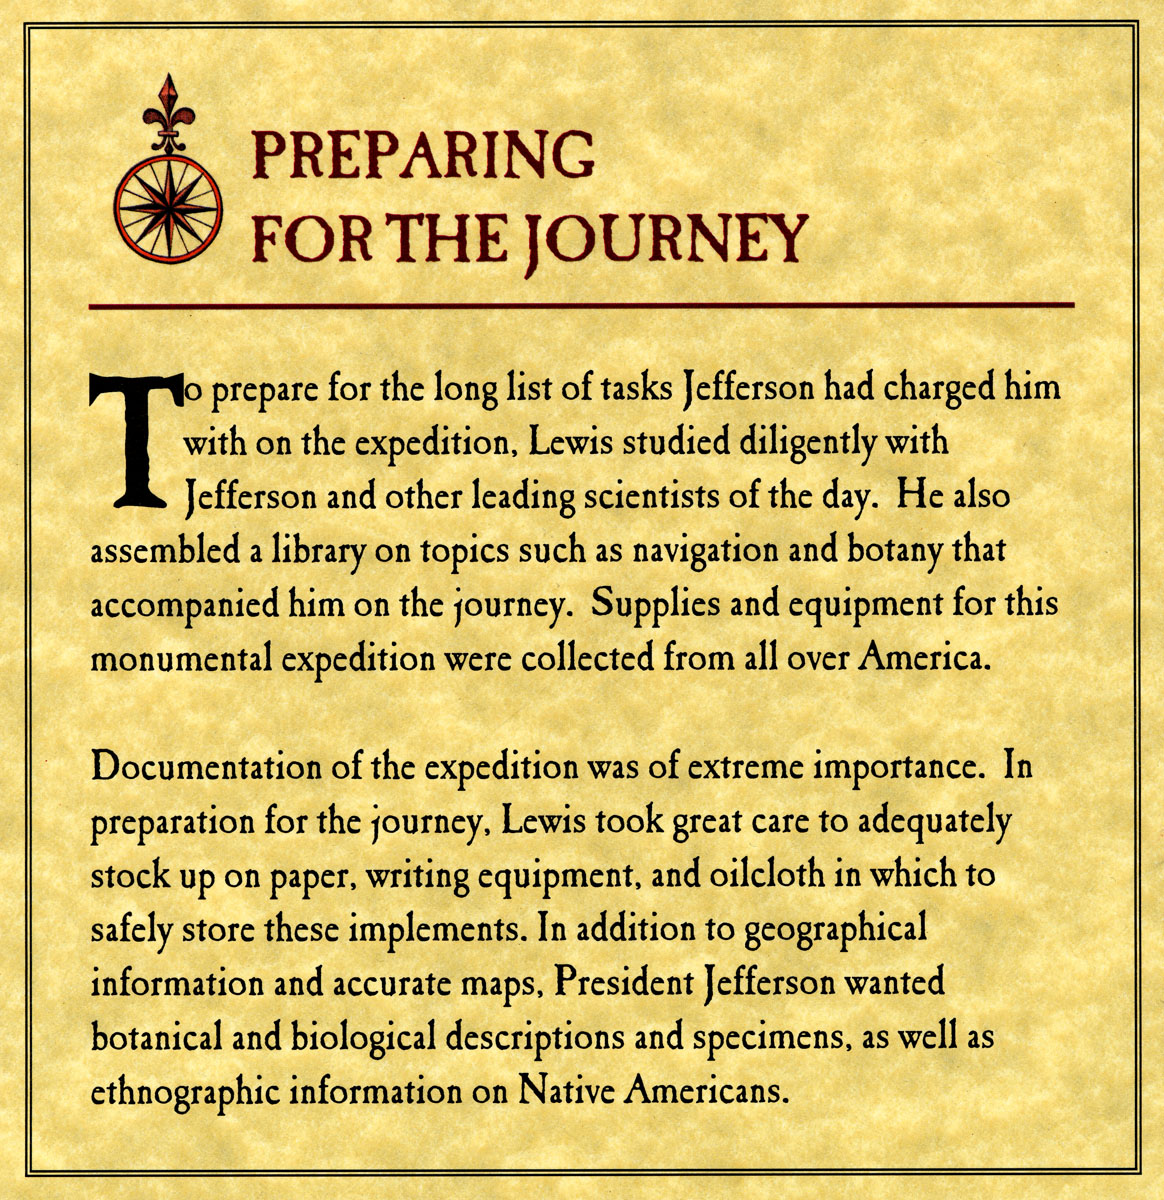 To prepare for the long list of tasks Jefferson had charged him with on the expedition, Lewis studied diligently with Jefferson and other leading scientists of the day.  He also assembled a library on topics such as navigation and botany that accompanied him on the journey.  